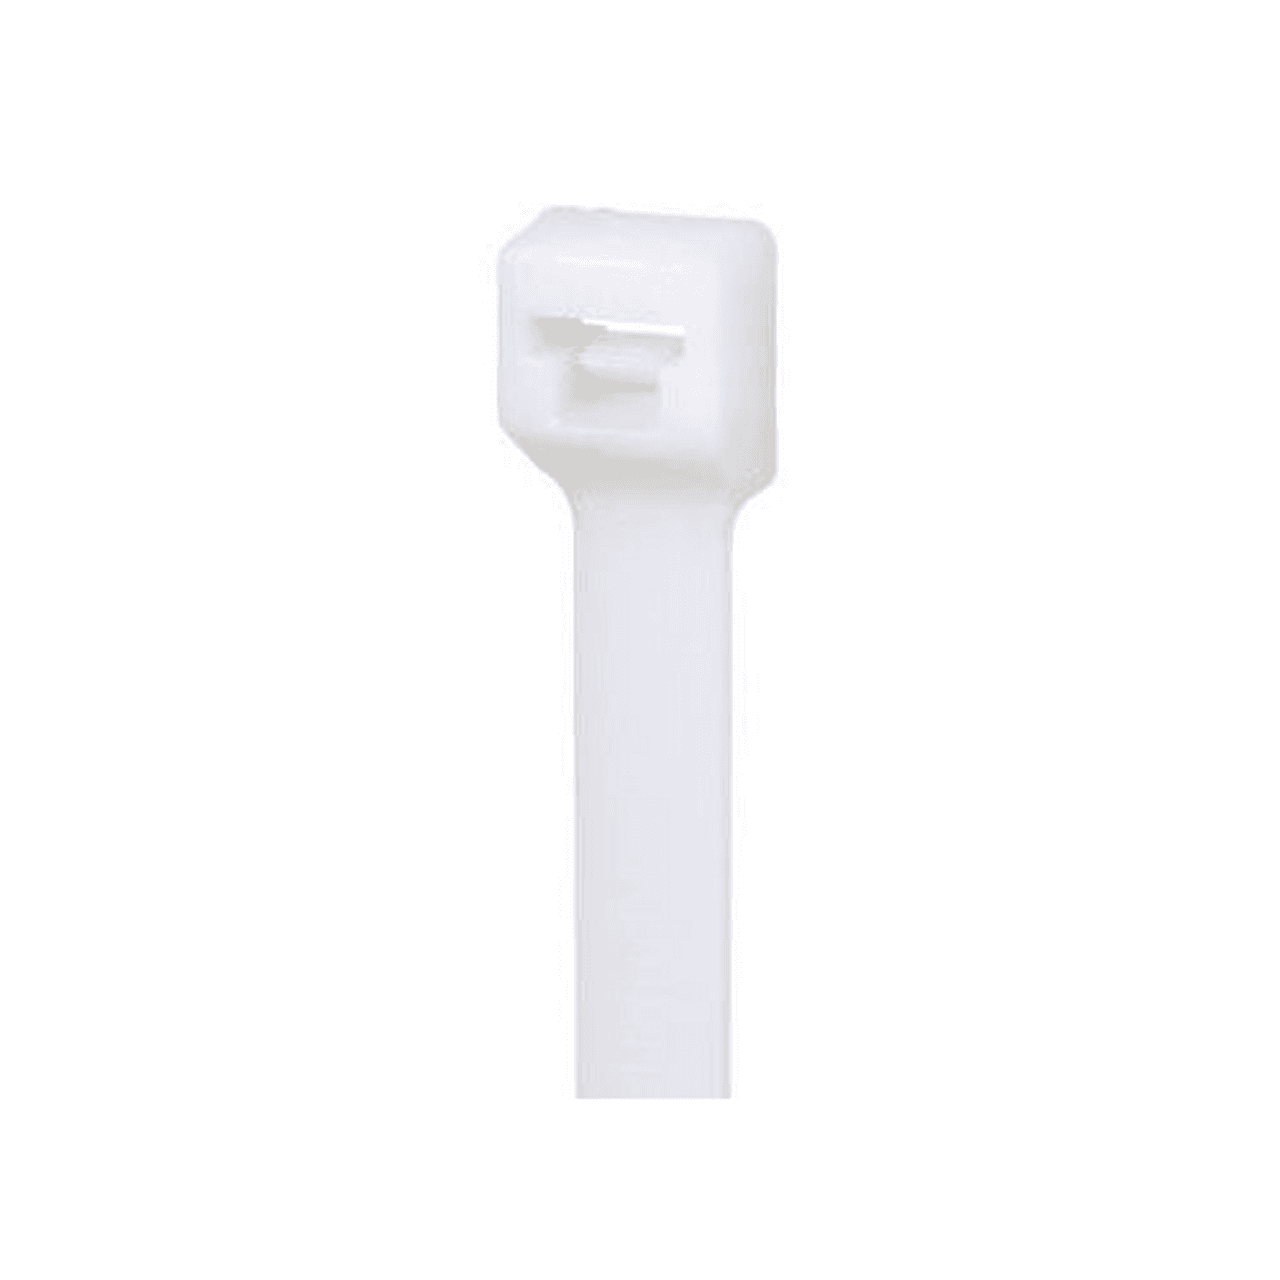 Panduit PLT.6SM-C PANDUIT PLT.6SM-C LOCKING CABLE TIES ARE DESIGNED TO SATISFY THE NEEDS OF GENERAL APPLICATIONS, WHILE DELIVERING CONSISTENT PERFORMANCE AND RELIABILITY. FEATURING A CURVED TIP TO ALLOW FOR EASY PICK UP FROM FLAT SURFACES AND FASTER INITIAL THREADING.